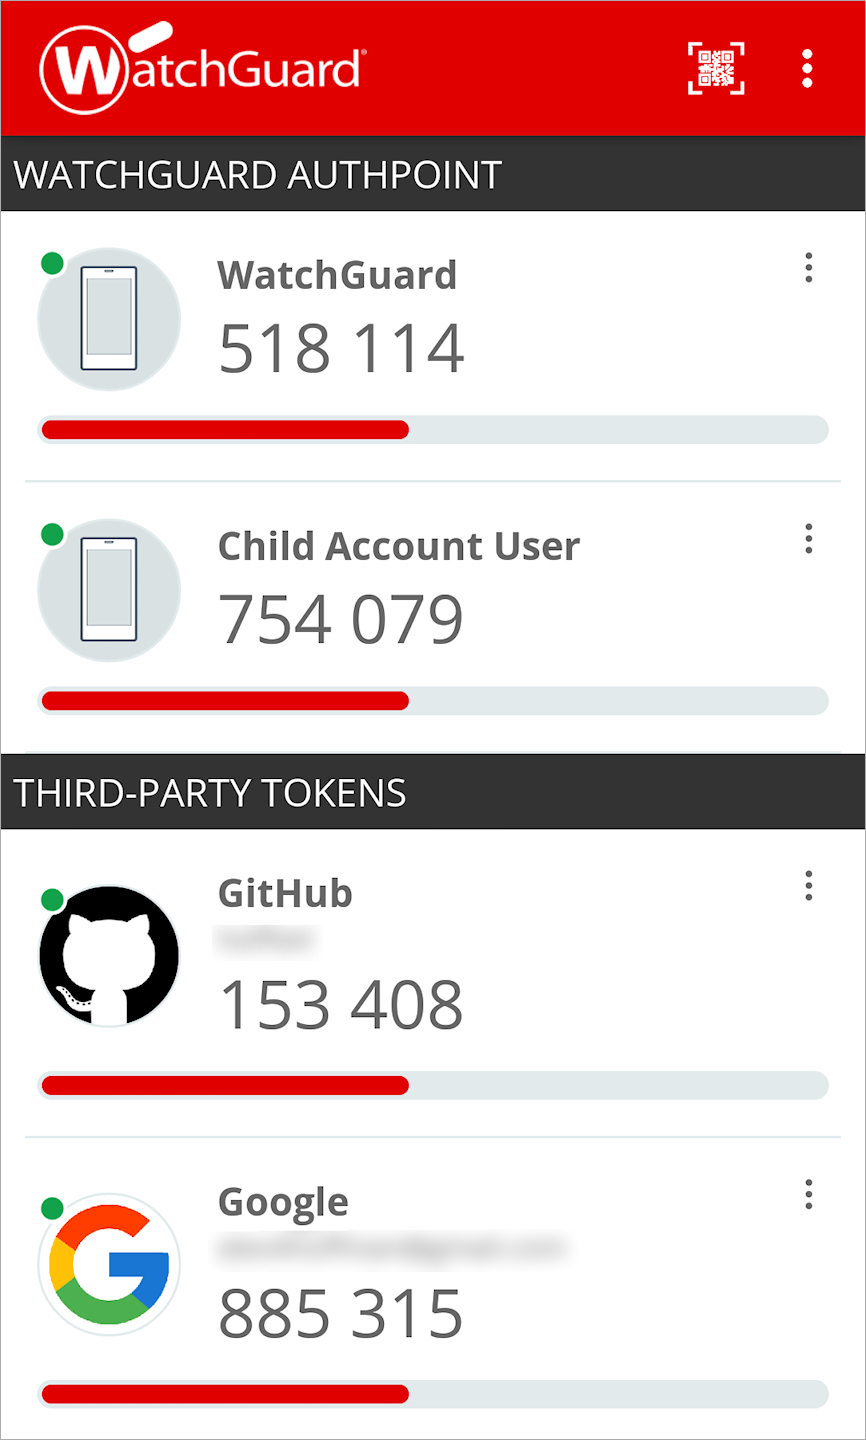 Screen shot that shows third-party tokens in the AuthPoint mobile app.